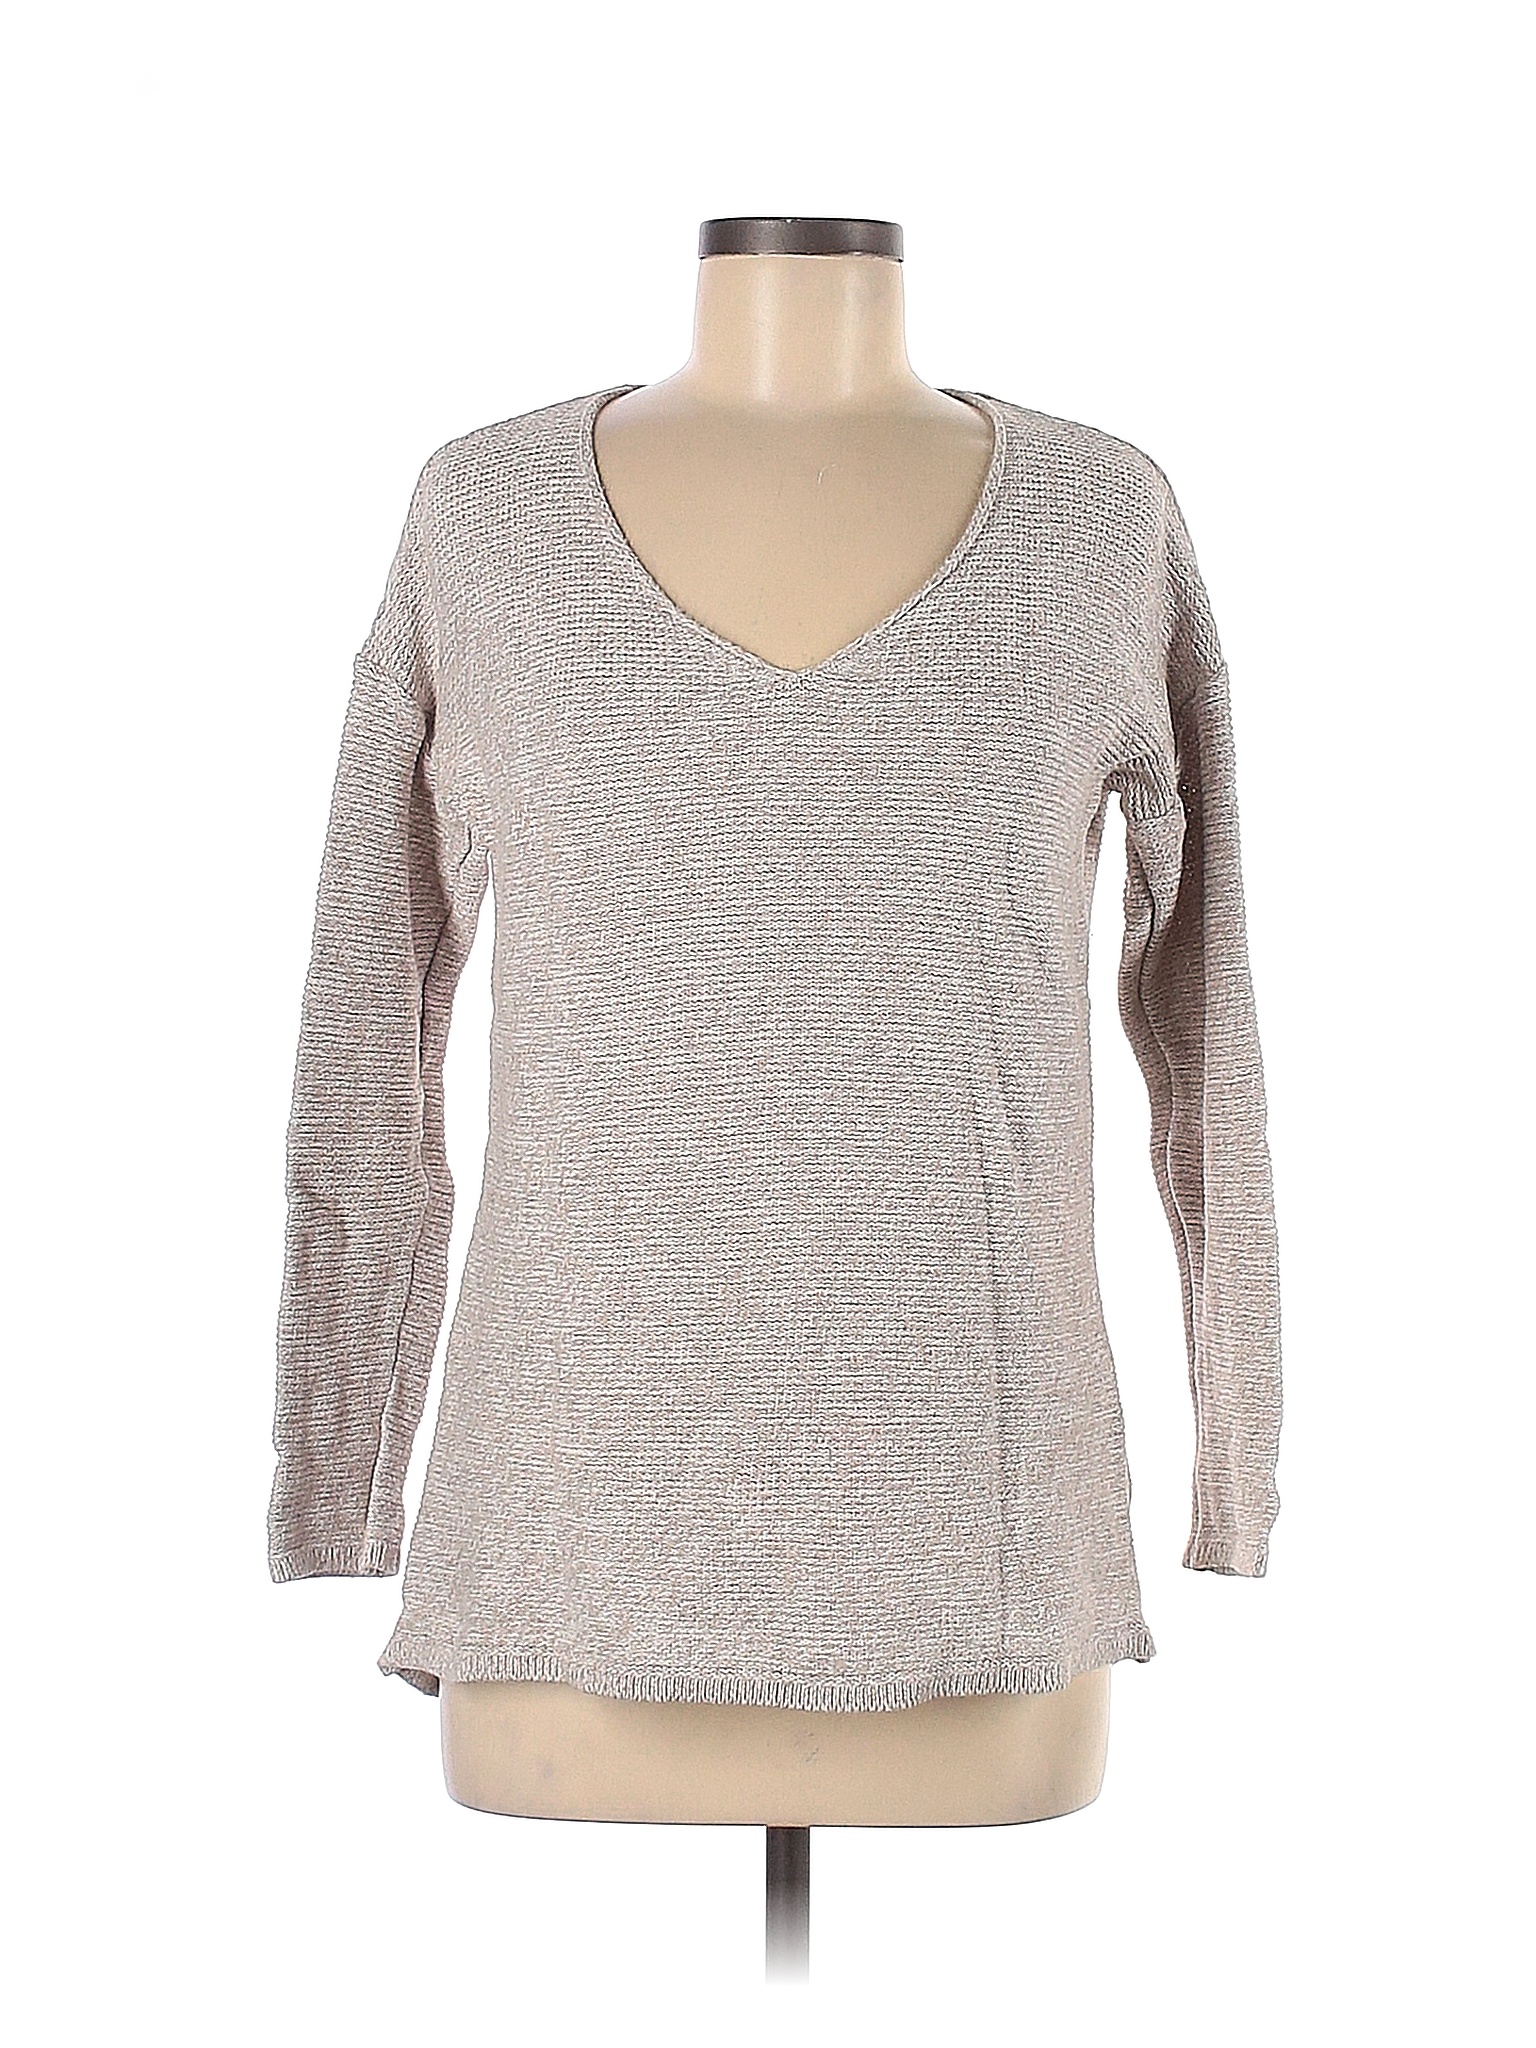 Old Navy 100% Cotton Color Block Marled Gray Tan Pullover Sweater Size ...